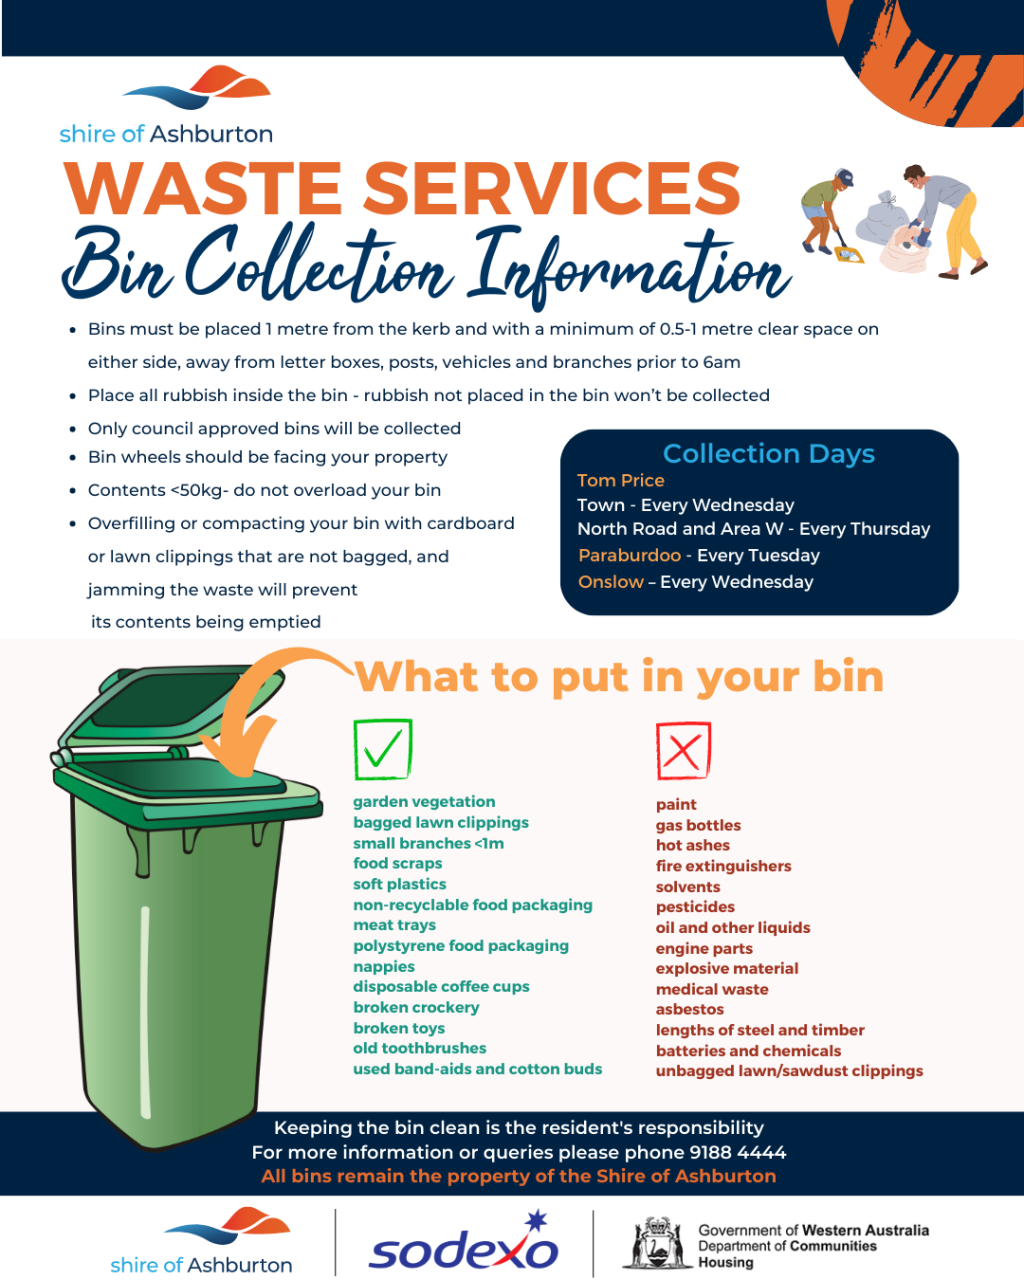 Shire of Ashburton residents reminded to use bins correctly to ensure